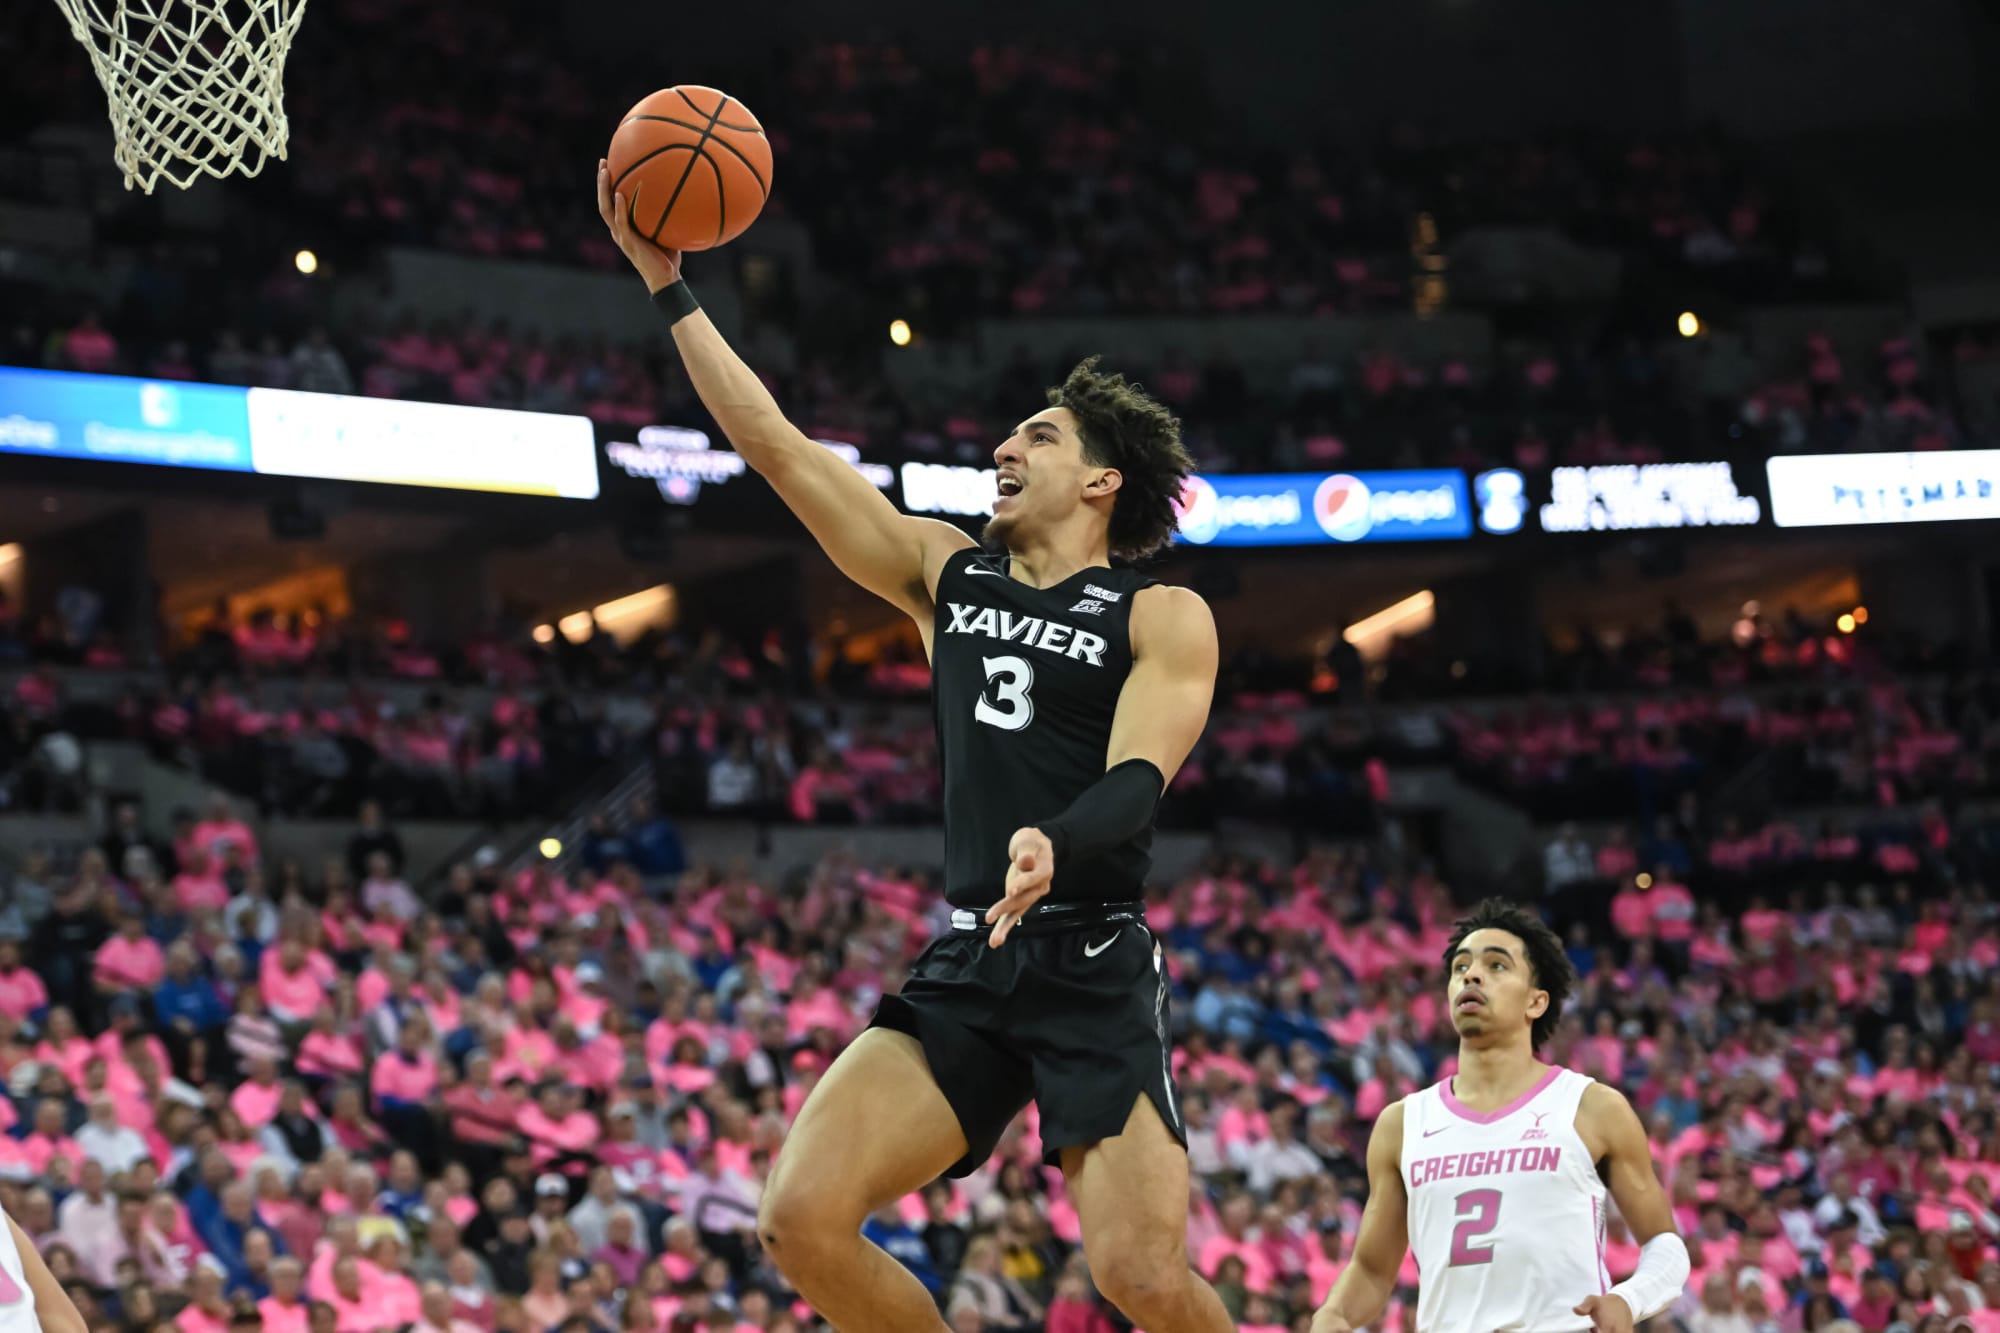 Providence vs. Xavier prediction and odds for Wednesday, February 1 (No Freemantle, no problem)